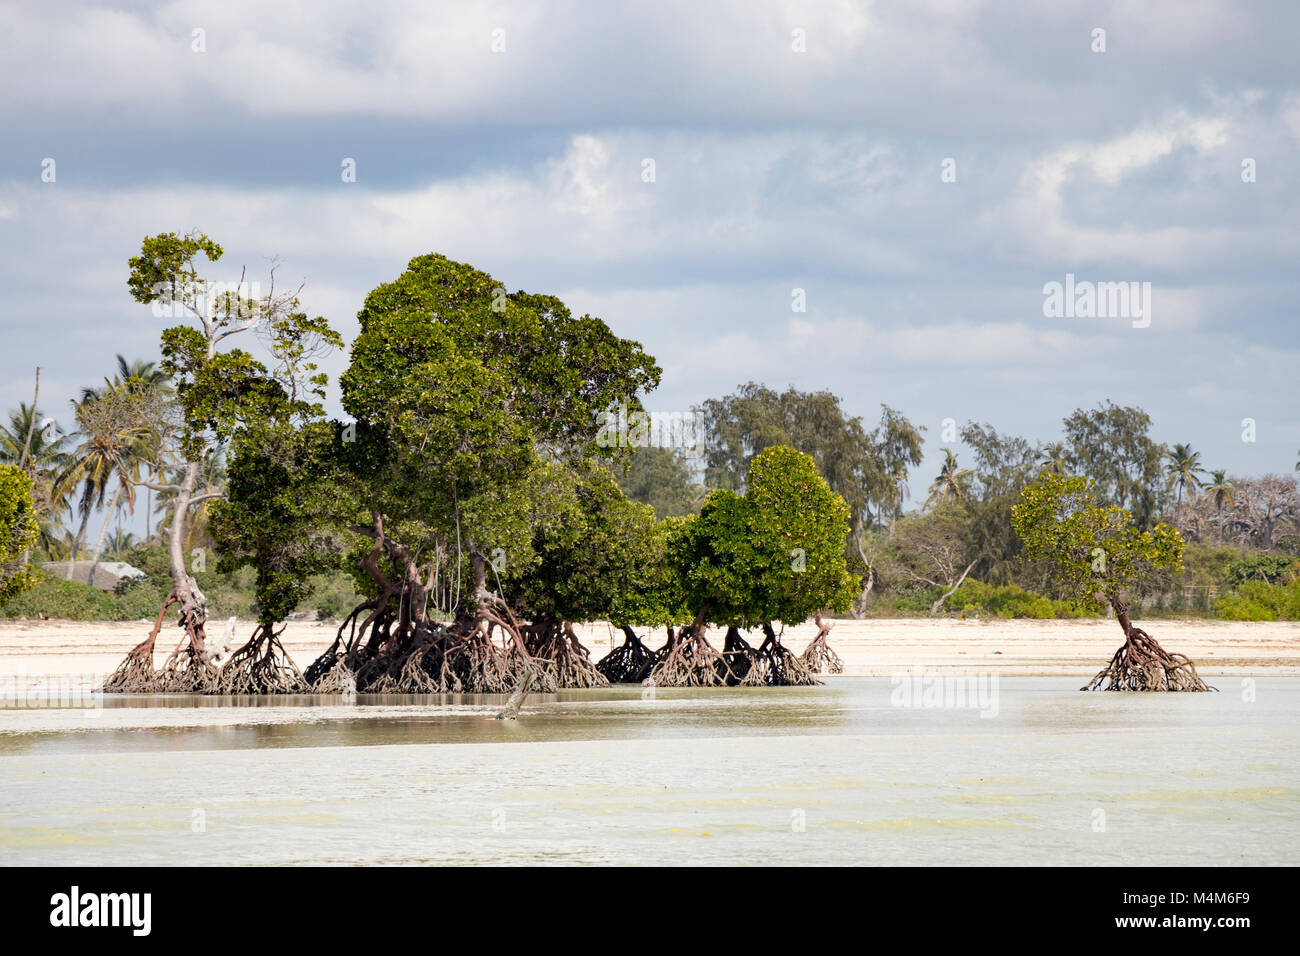 Mangrove trees in coastal wetlands of Mozambique Stock Photo